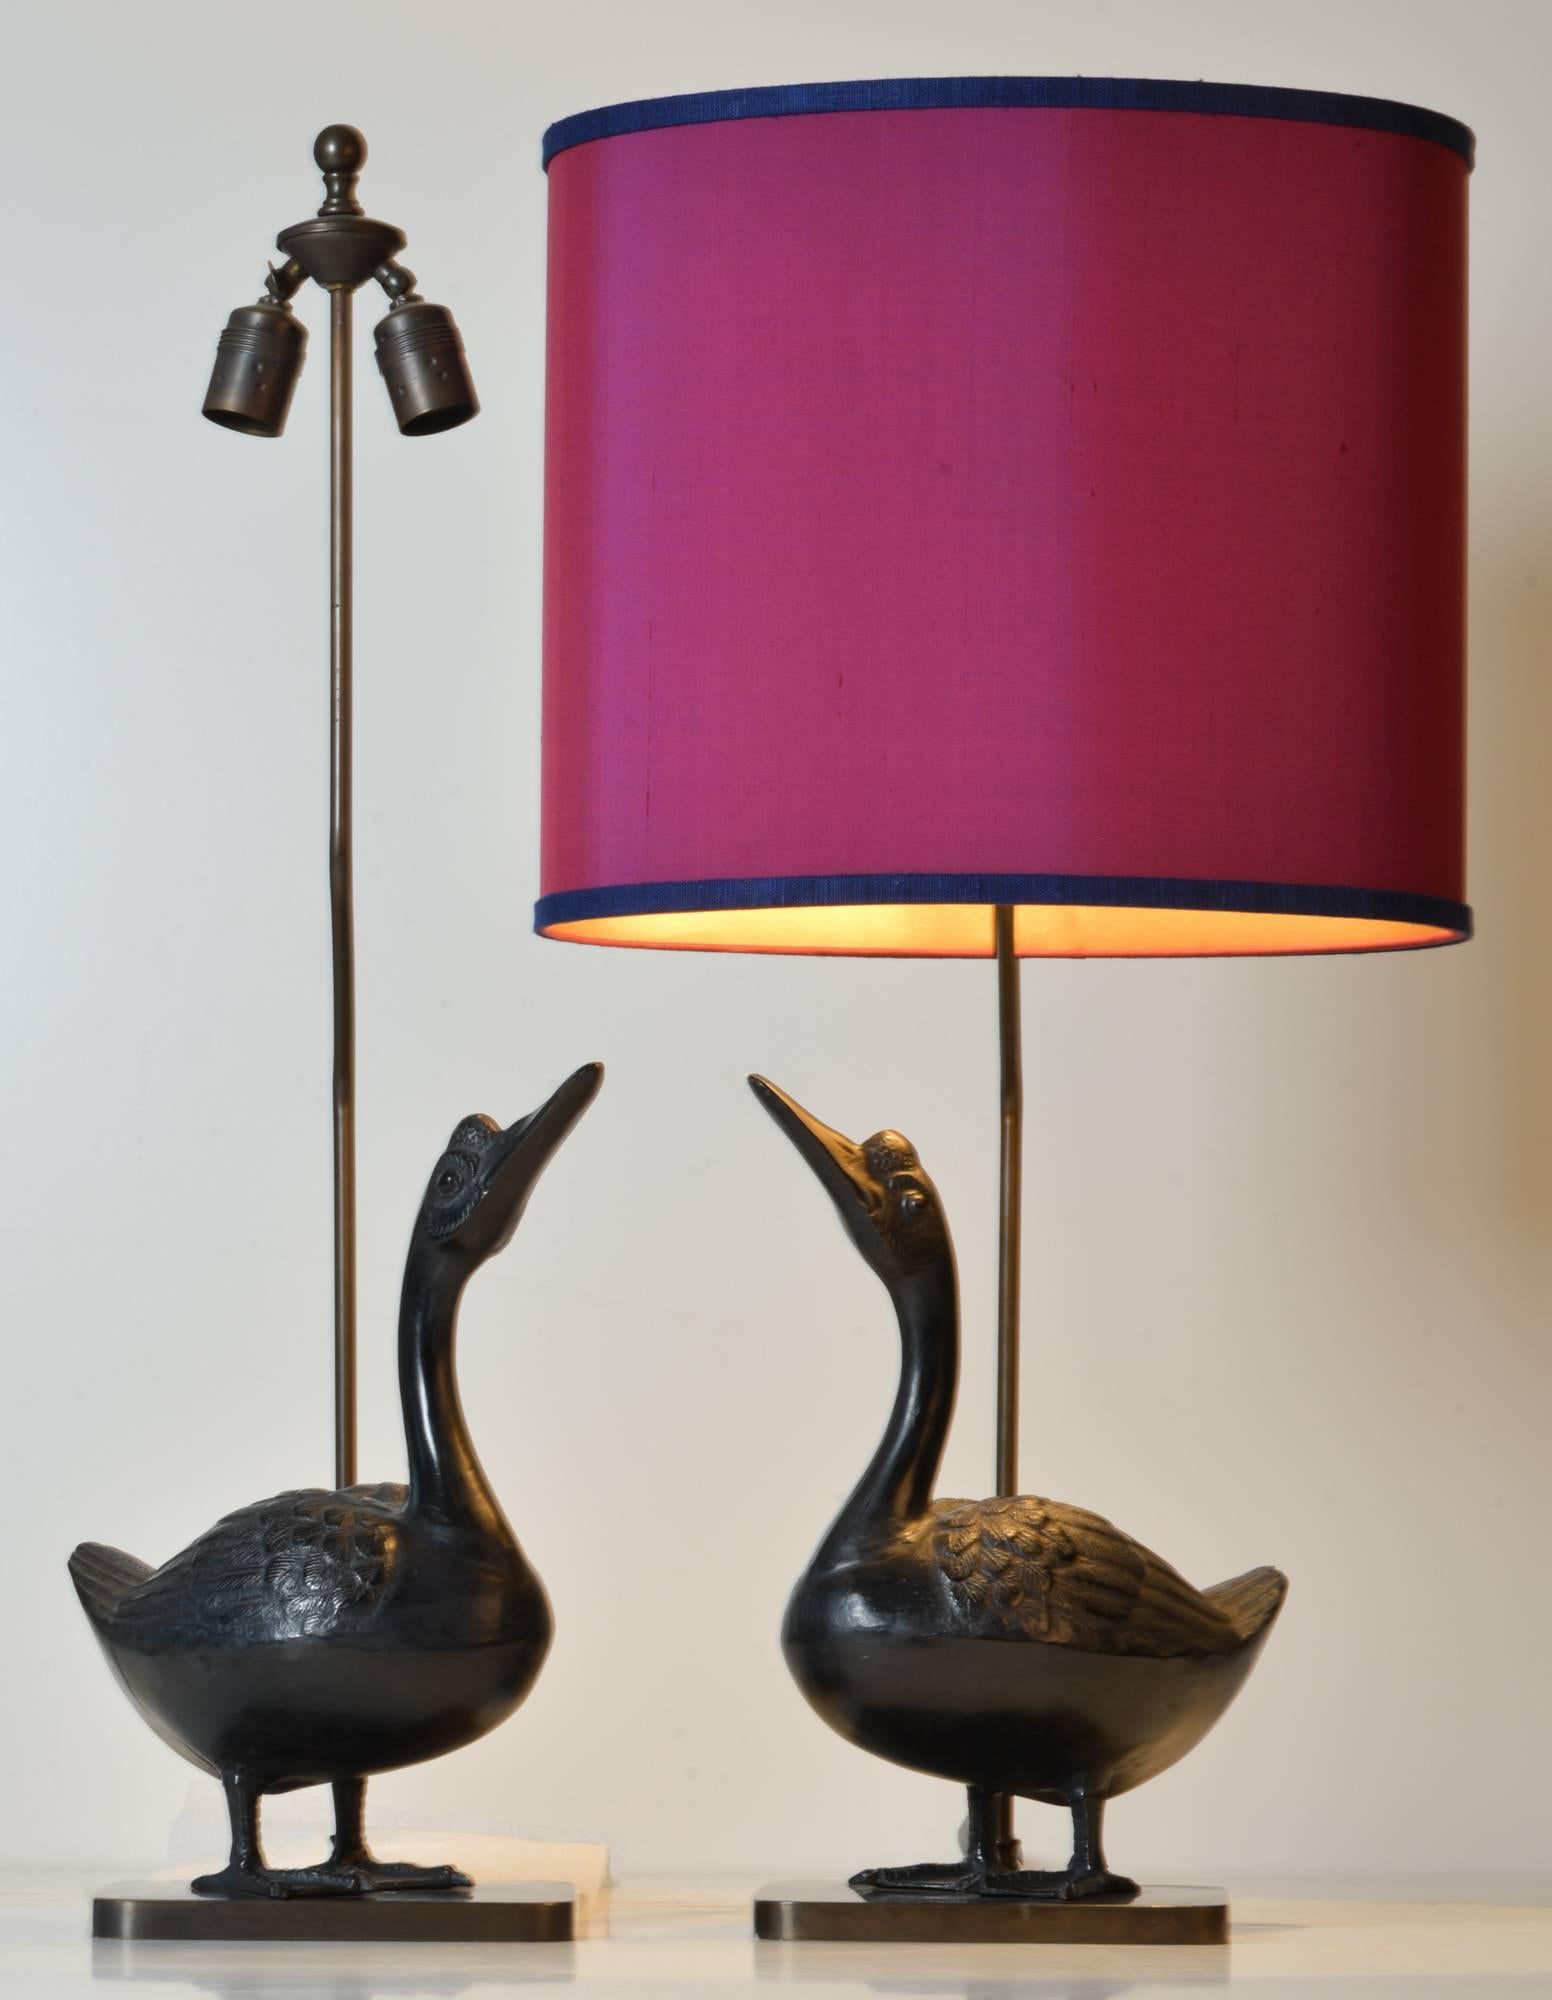 Pair of vintage Chinese bronze goose table lamps. The lamps have a double socket and have new wiring with on-off pull switches. With pair of high-end custom-made linen shades by Rene Houben.

Beautifully cast and finely detailed down to the last